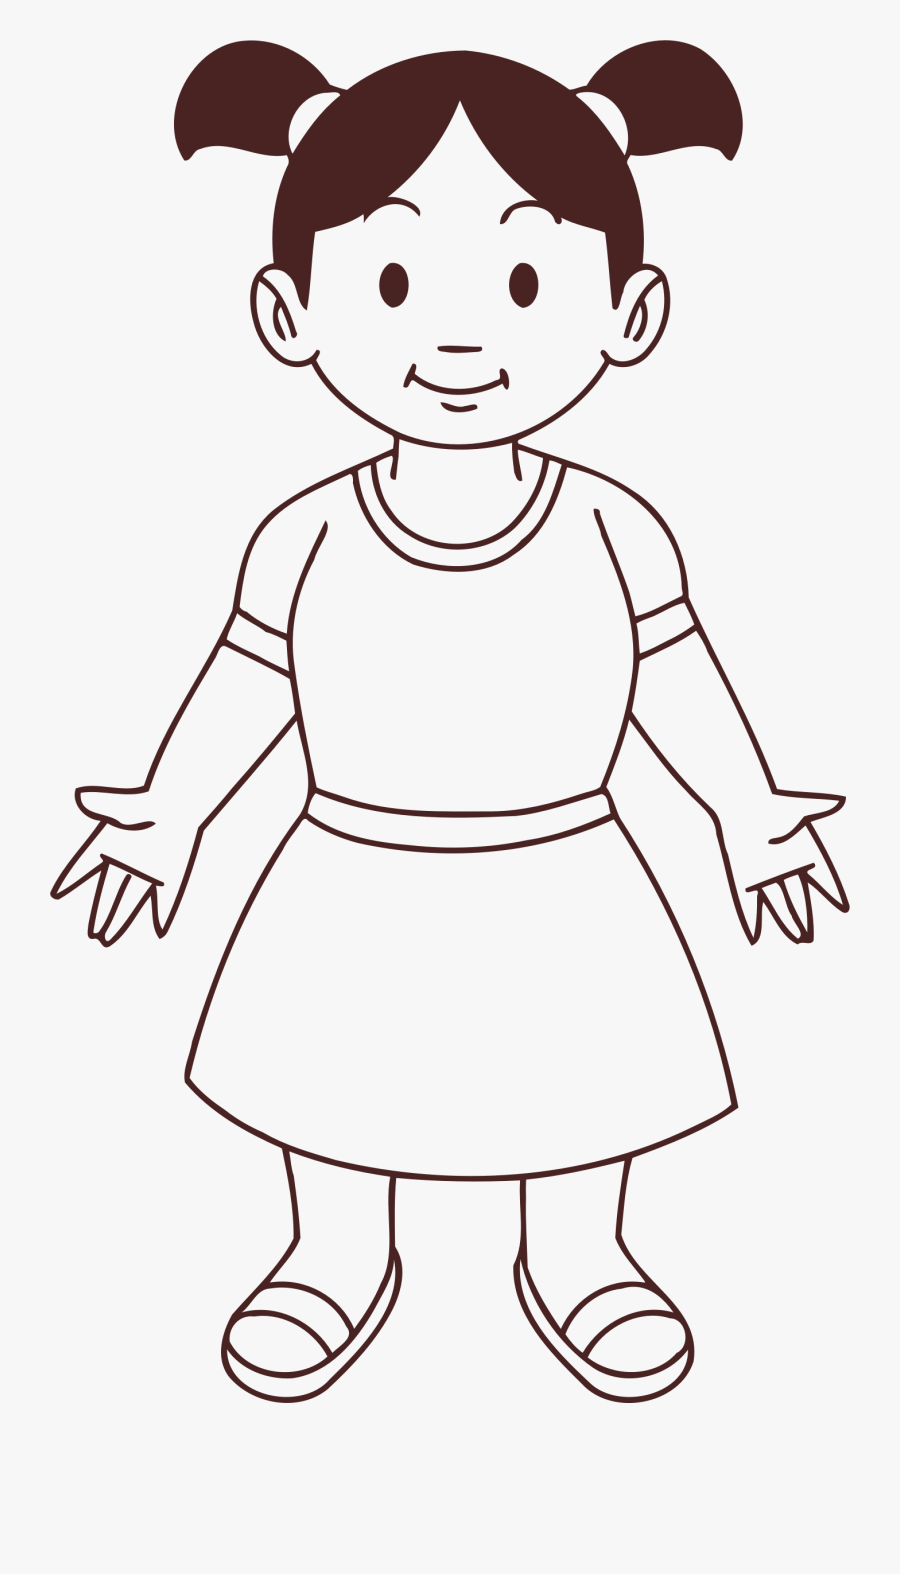 Draw Clipart Kid Draw Girl Baby Line Drawing Free Transparent Clipart Clipartkey See more ideas about easy drawings, drawings, drawing tutorial. draw clipart kid draw girl baby line